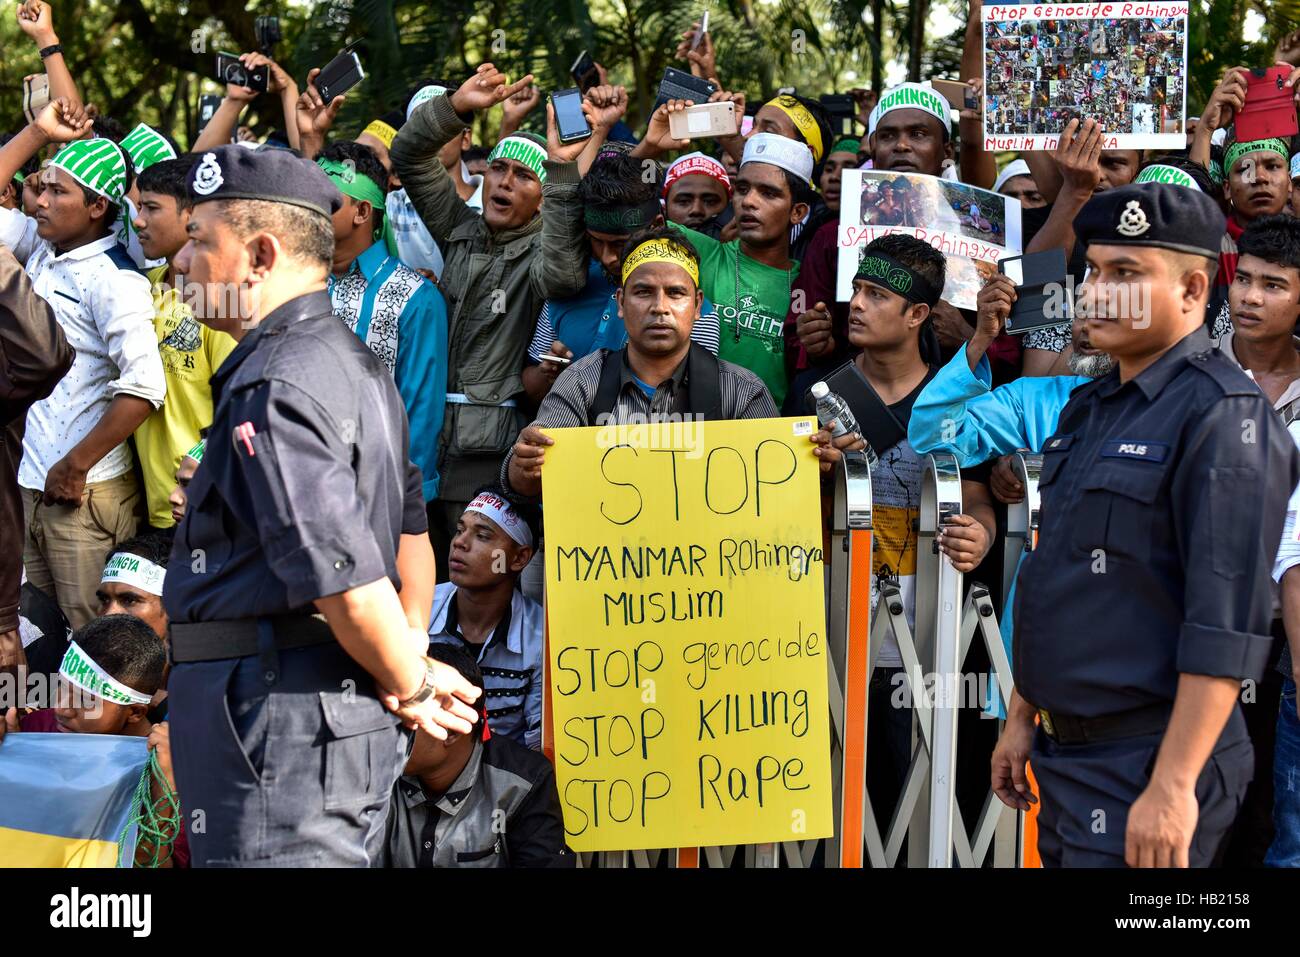 Kuala Lumpur, Malaysia. 4th December, 2016. Rohingya refugees shout slogans during a gathering at Titiwangsa Stadium in Kuala Lumpur on December 04, 2016 against the persecution of Rohingya Muslims in Myanmar.  Aung San Suu Kyi must step in to prevent the 'genocide' of Rohingya Muslims in Myanmar, Malaysia's prime minister Najib Razak said as he mocked the Nobel laureate for her inaction. Credit:  Chris JUNG/Alamy Live News Stock Photo